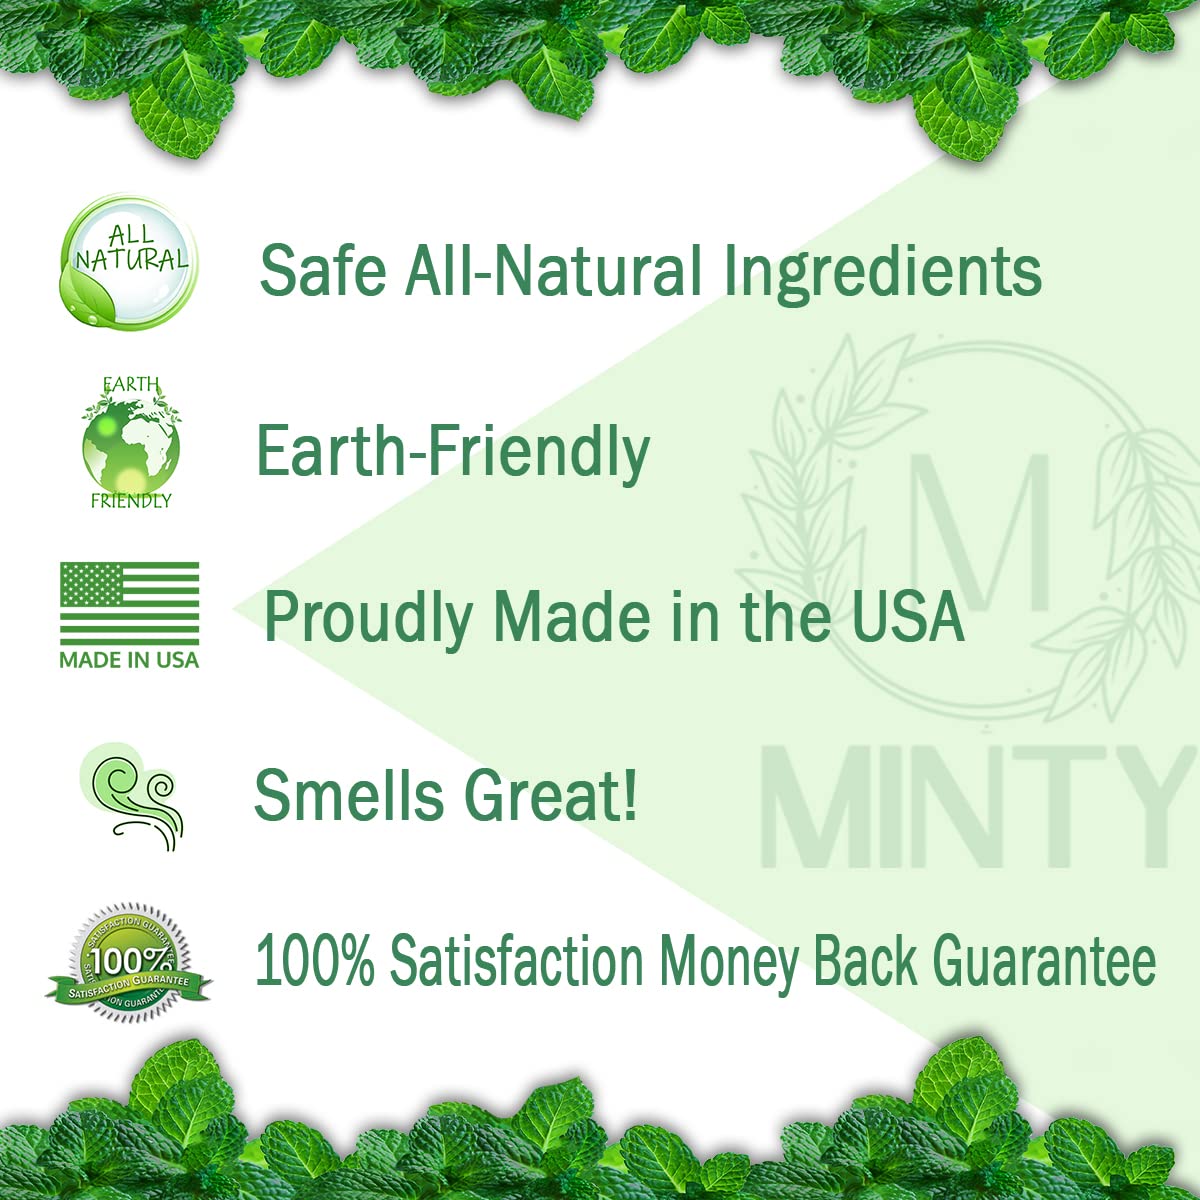 Minty Rodent Repellent, Natural 5% Peppermint Oil Spray for Mice, Rats, Chipmunks and Rodents, Indoor and Outdoor, House and Car Engine Use, 128 fl oz Gallon